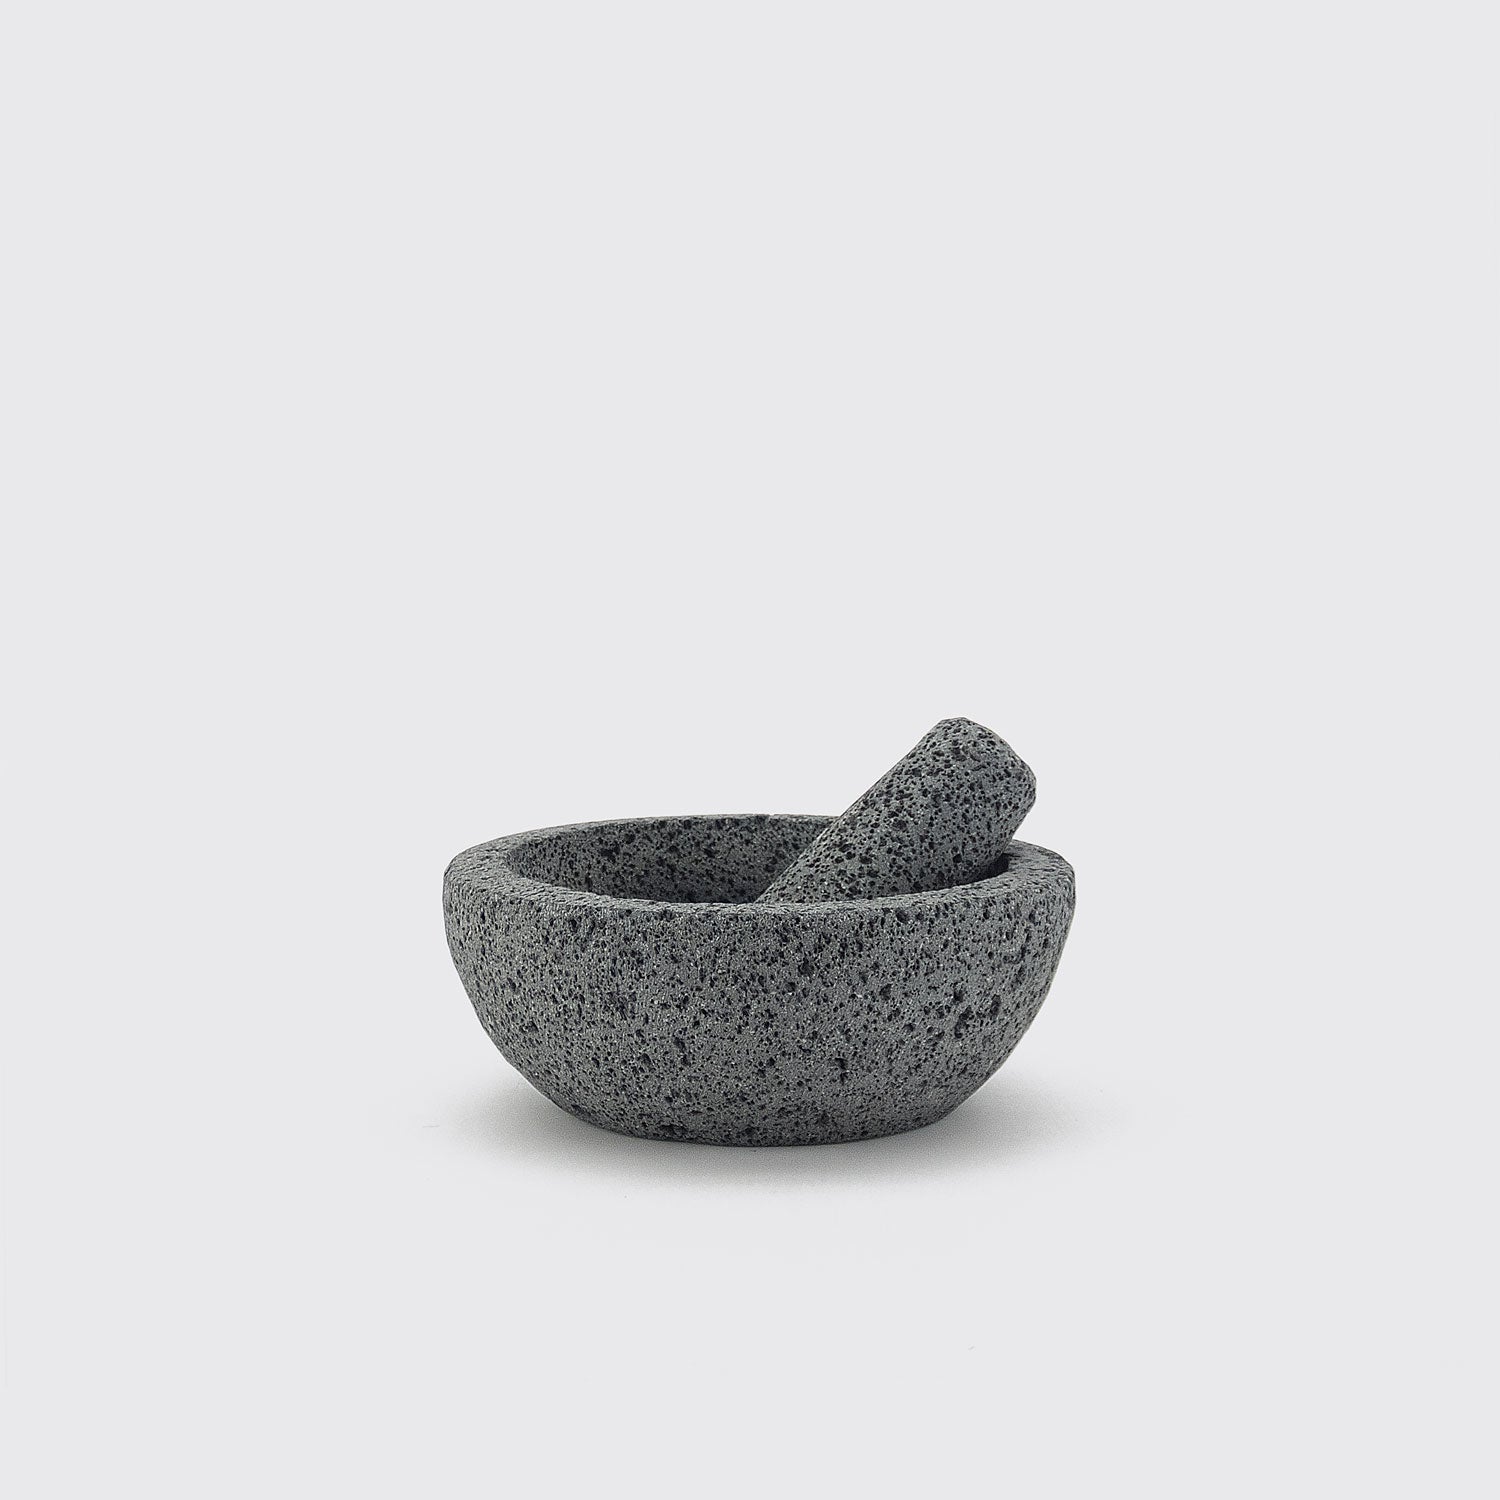 Authentic Molcajete Bowl Piedra Volcánica Mexican Mortar Pestle – Ibarra  Imports